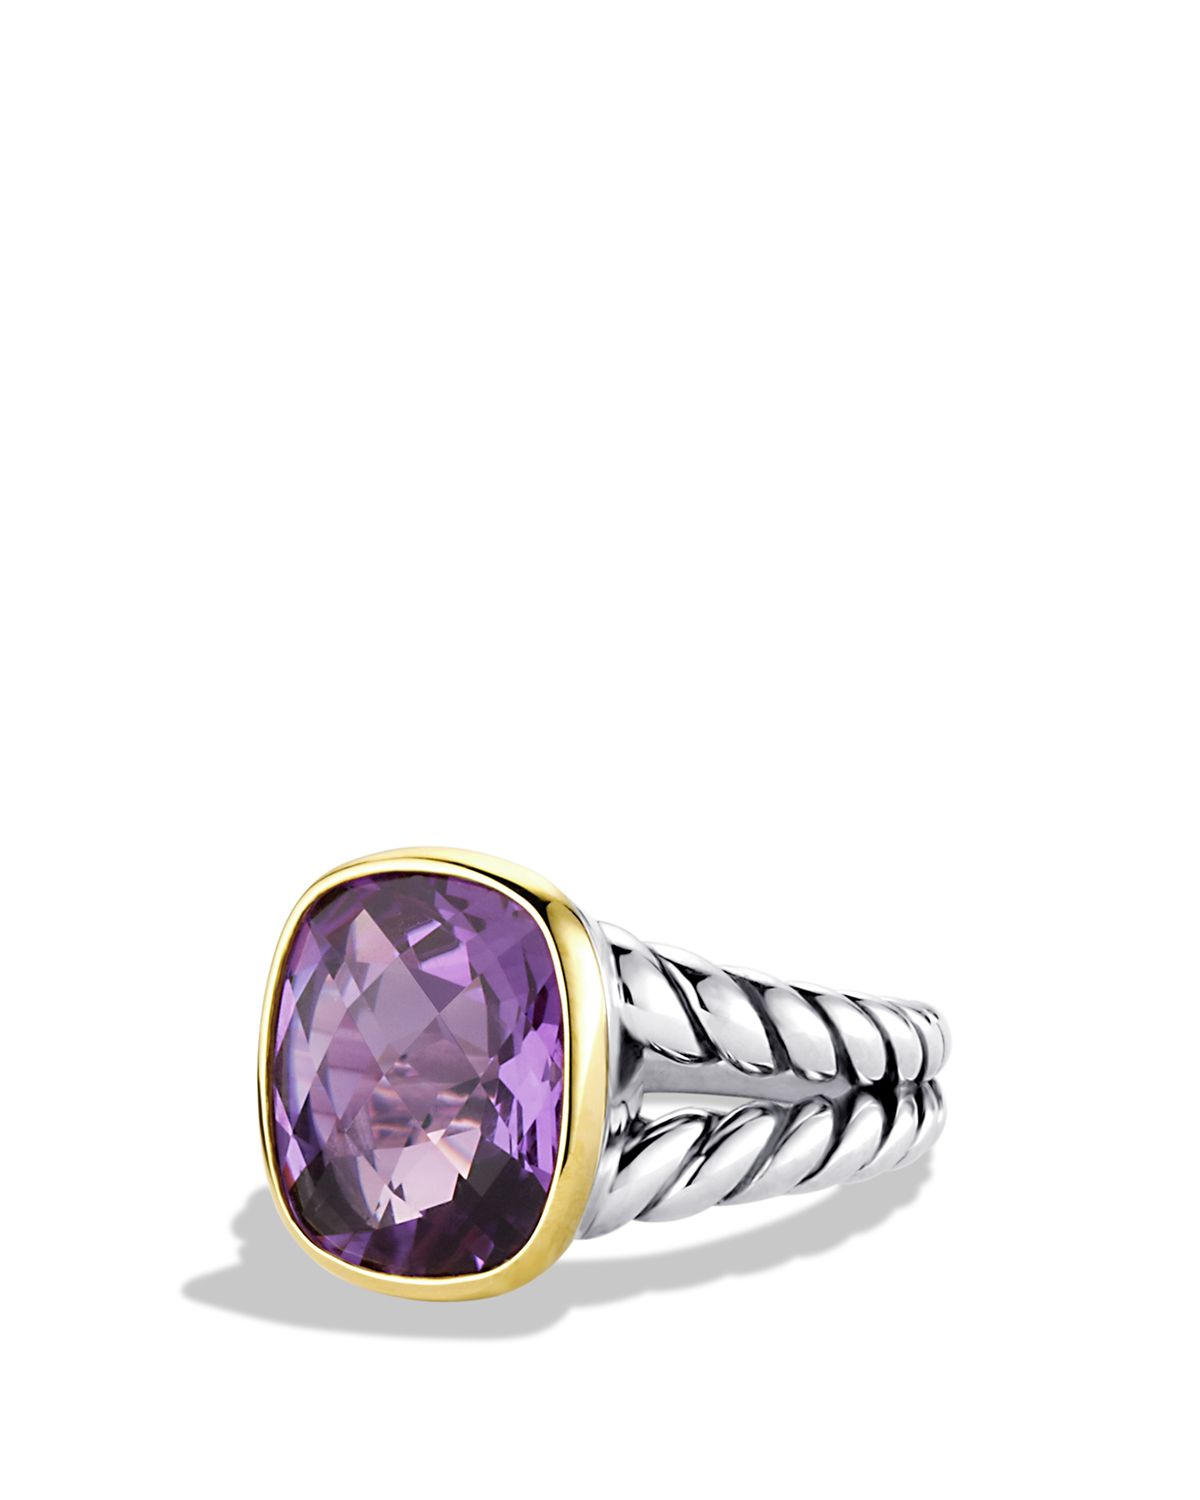 David Yurman Noblesse Ring With Amethyst And Gold in Silver/Yellow Gold